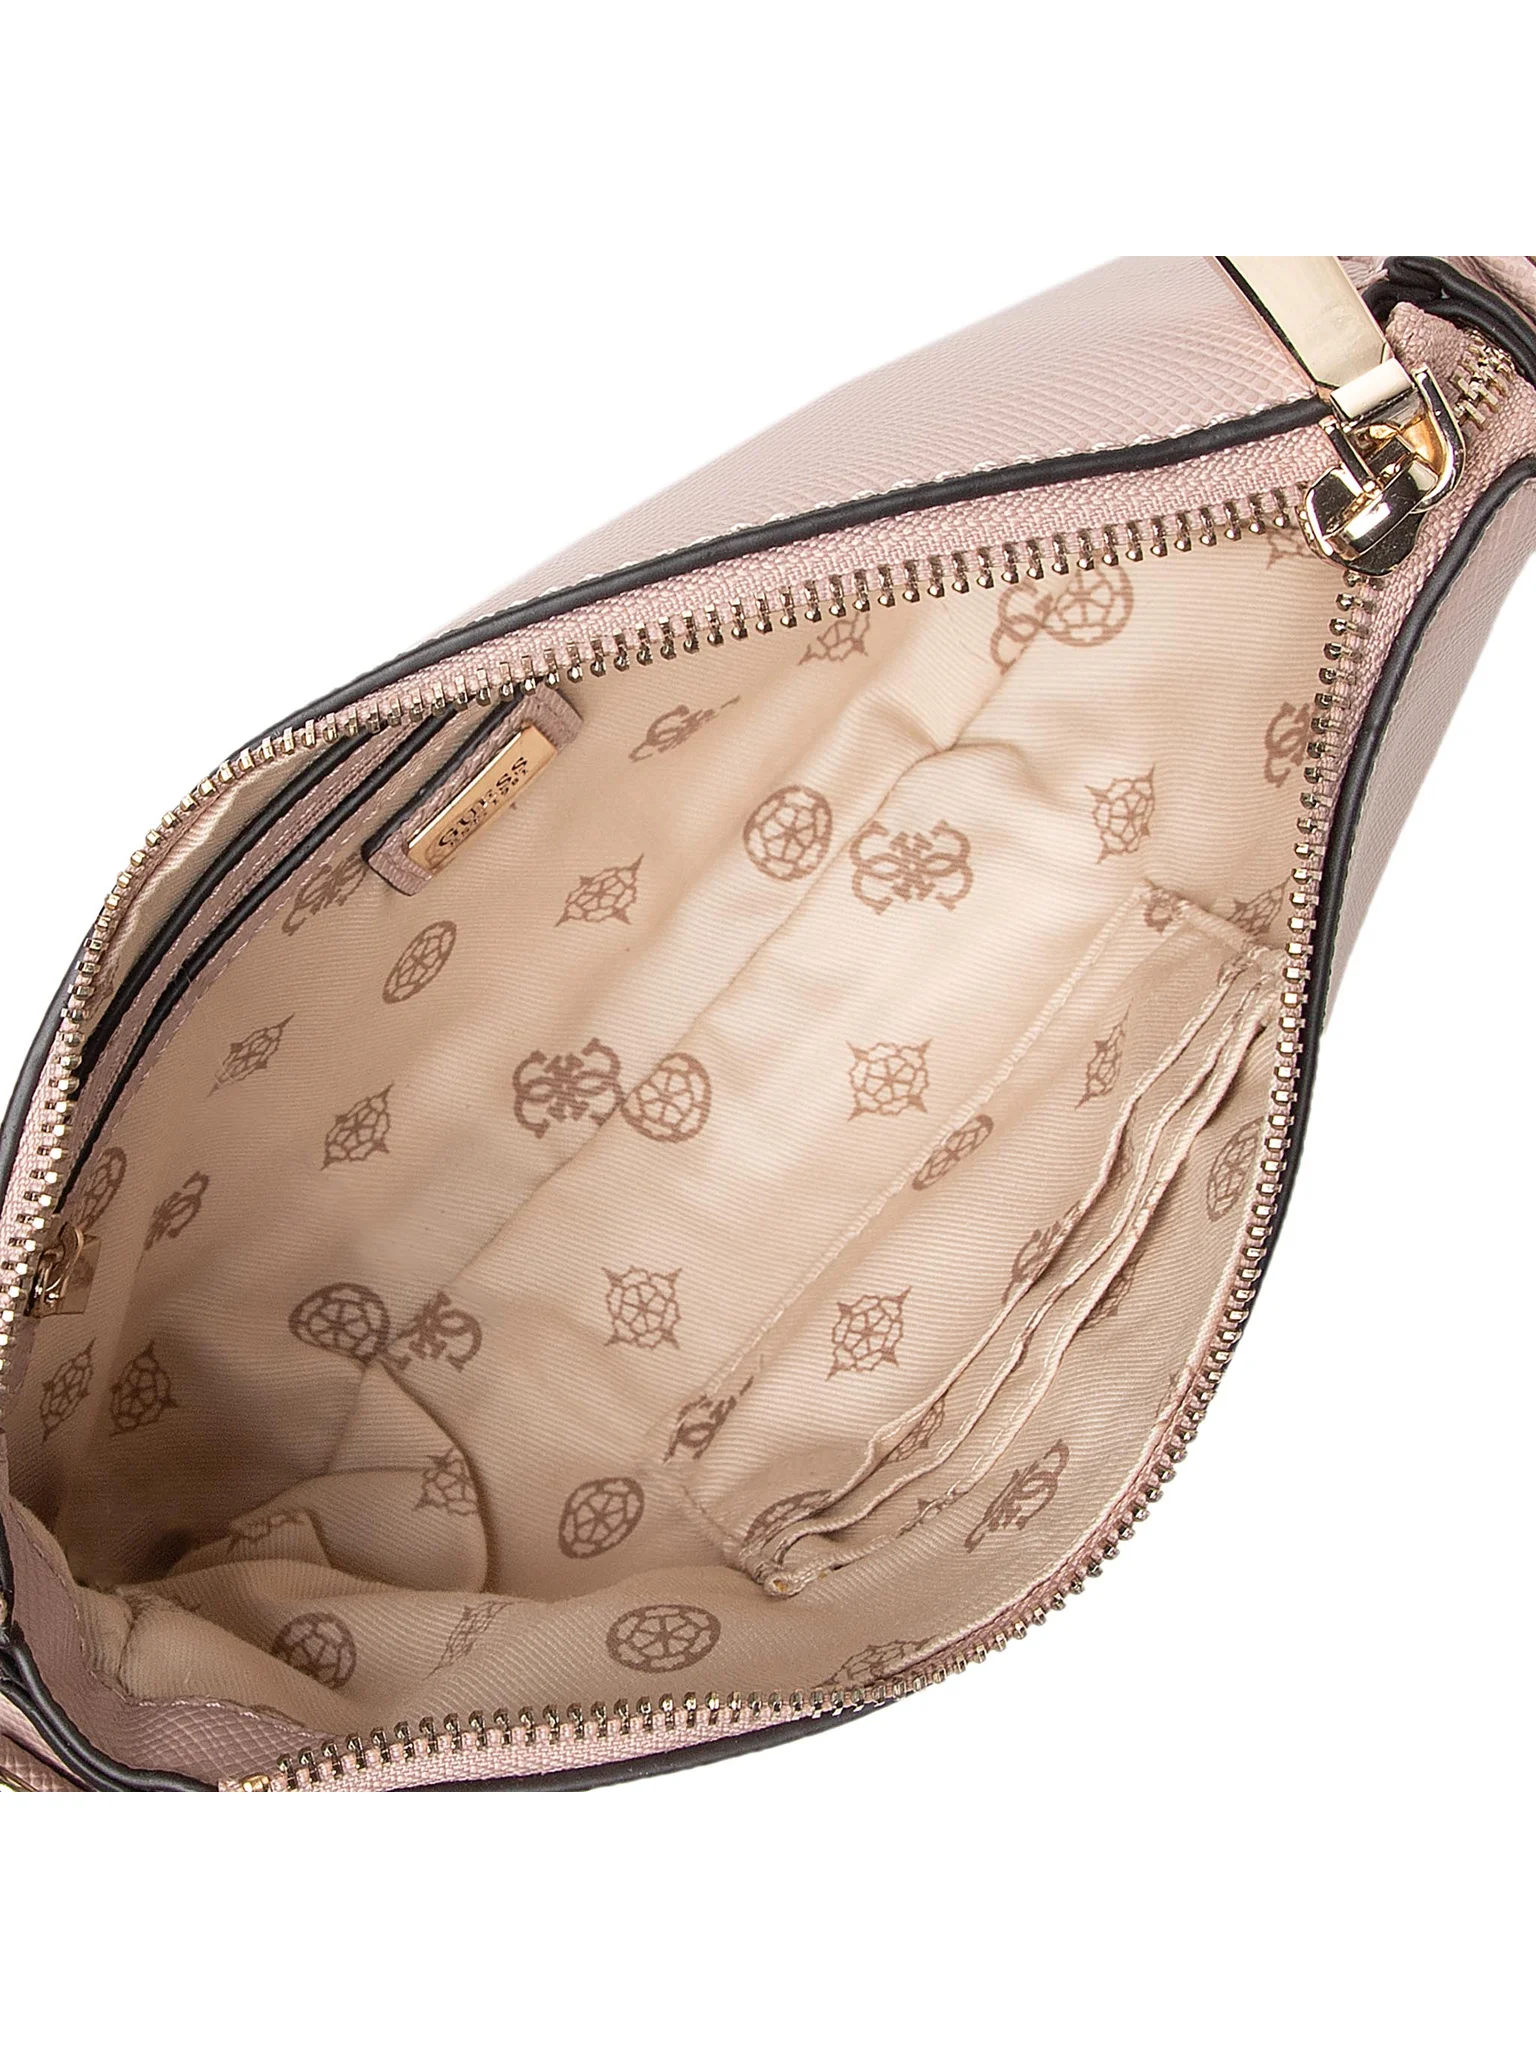 Guess ALEXIE DOUBLE POUCH CROSSBODY